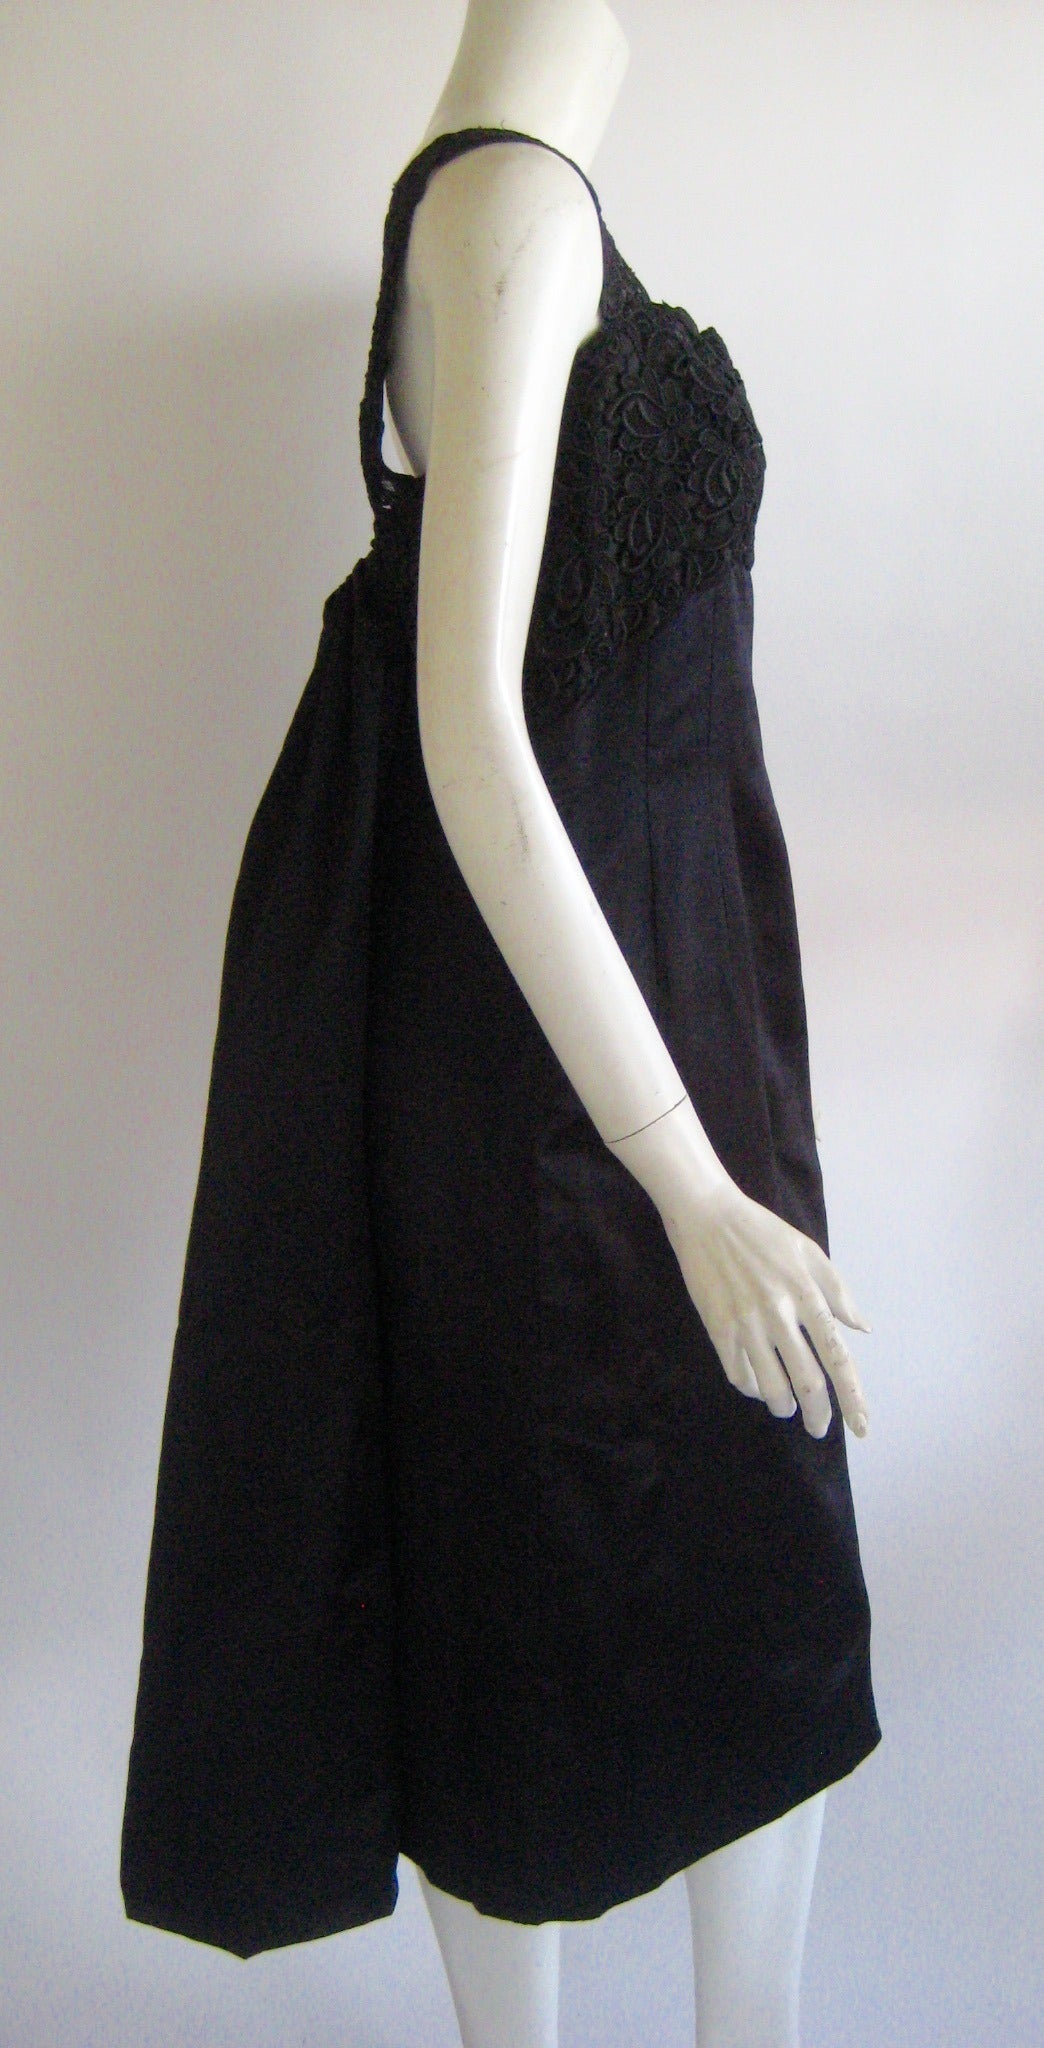 Lovely black silk cocktail dress with eyelet bodice and attached back drape that comes to a bubble shape at the bottom .Truly wonderful design .This is made of a lustrous silk and fine cotton eyelet and it looks as if it was worn very little if at